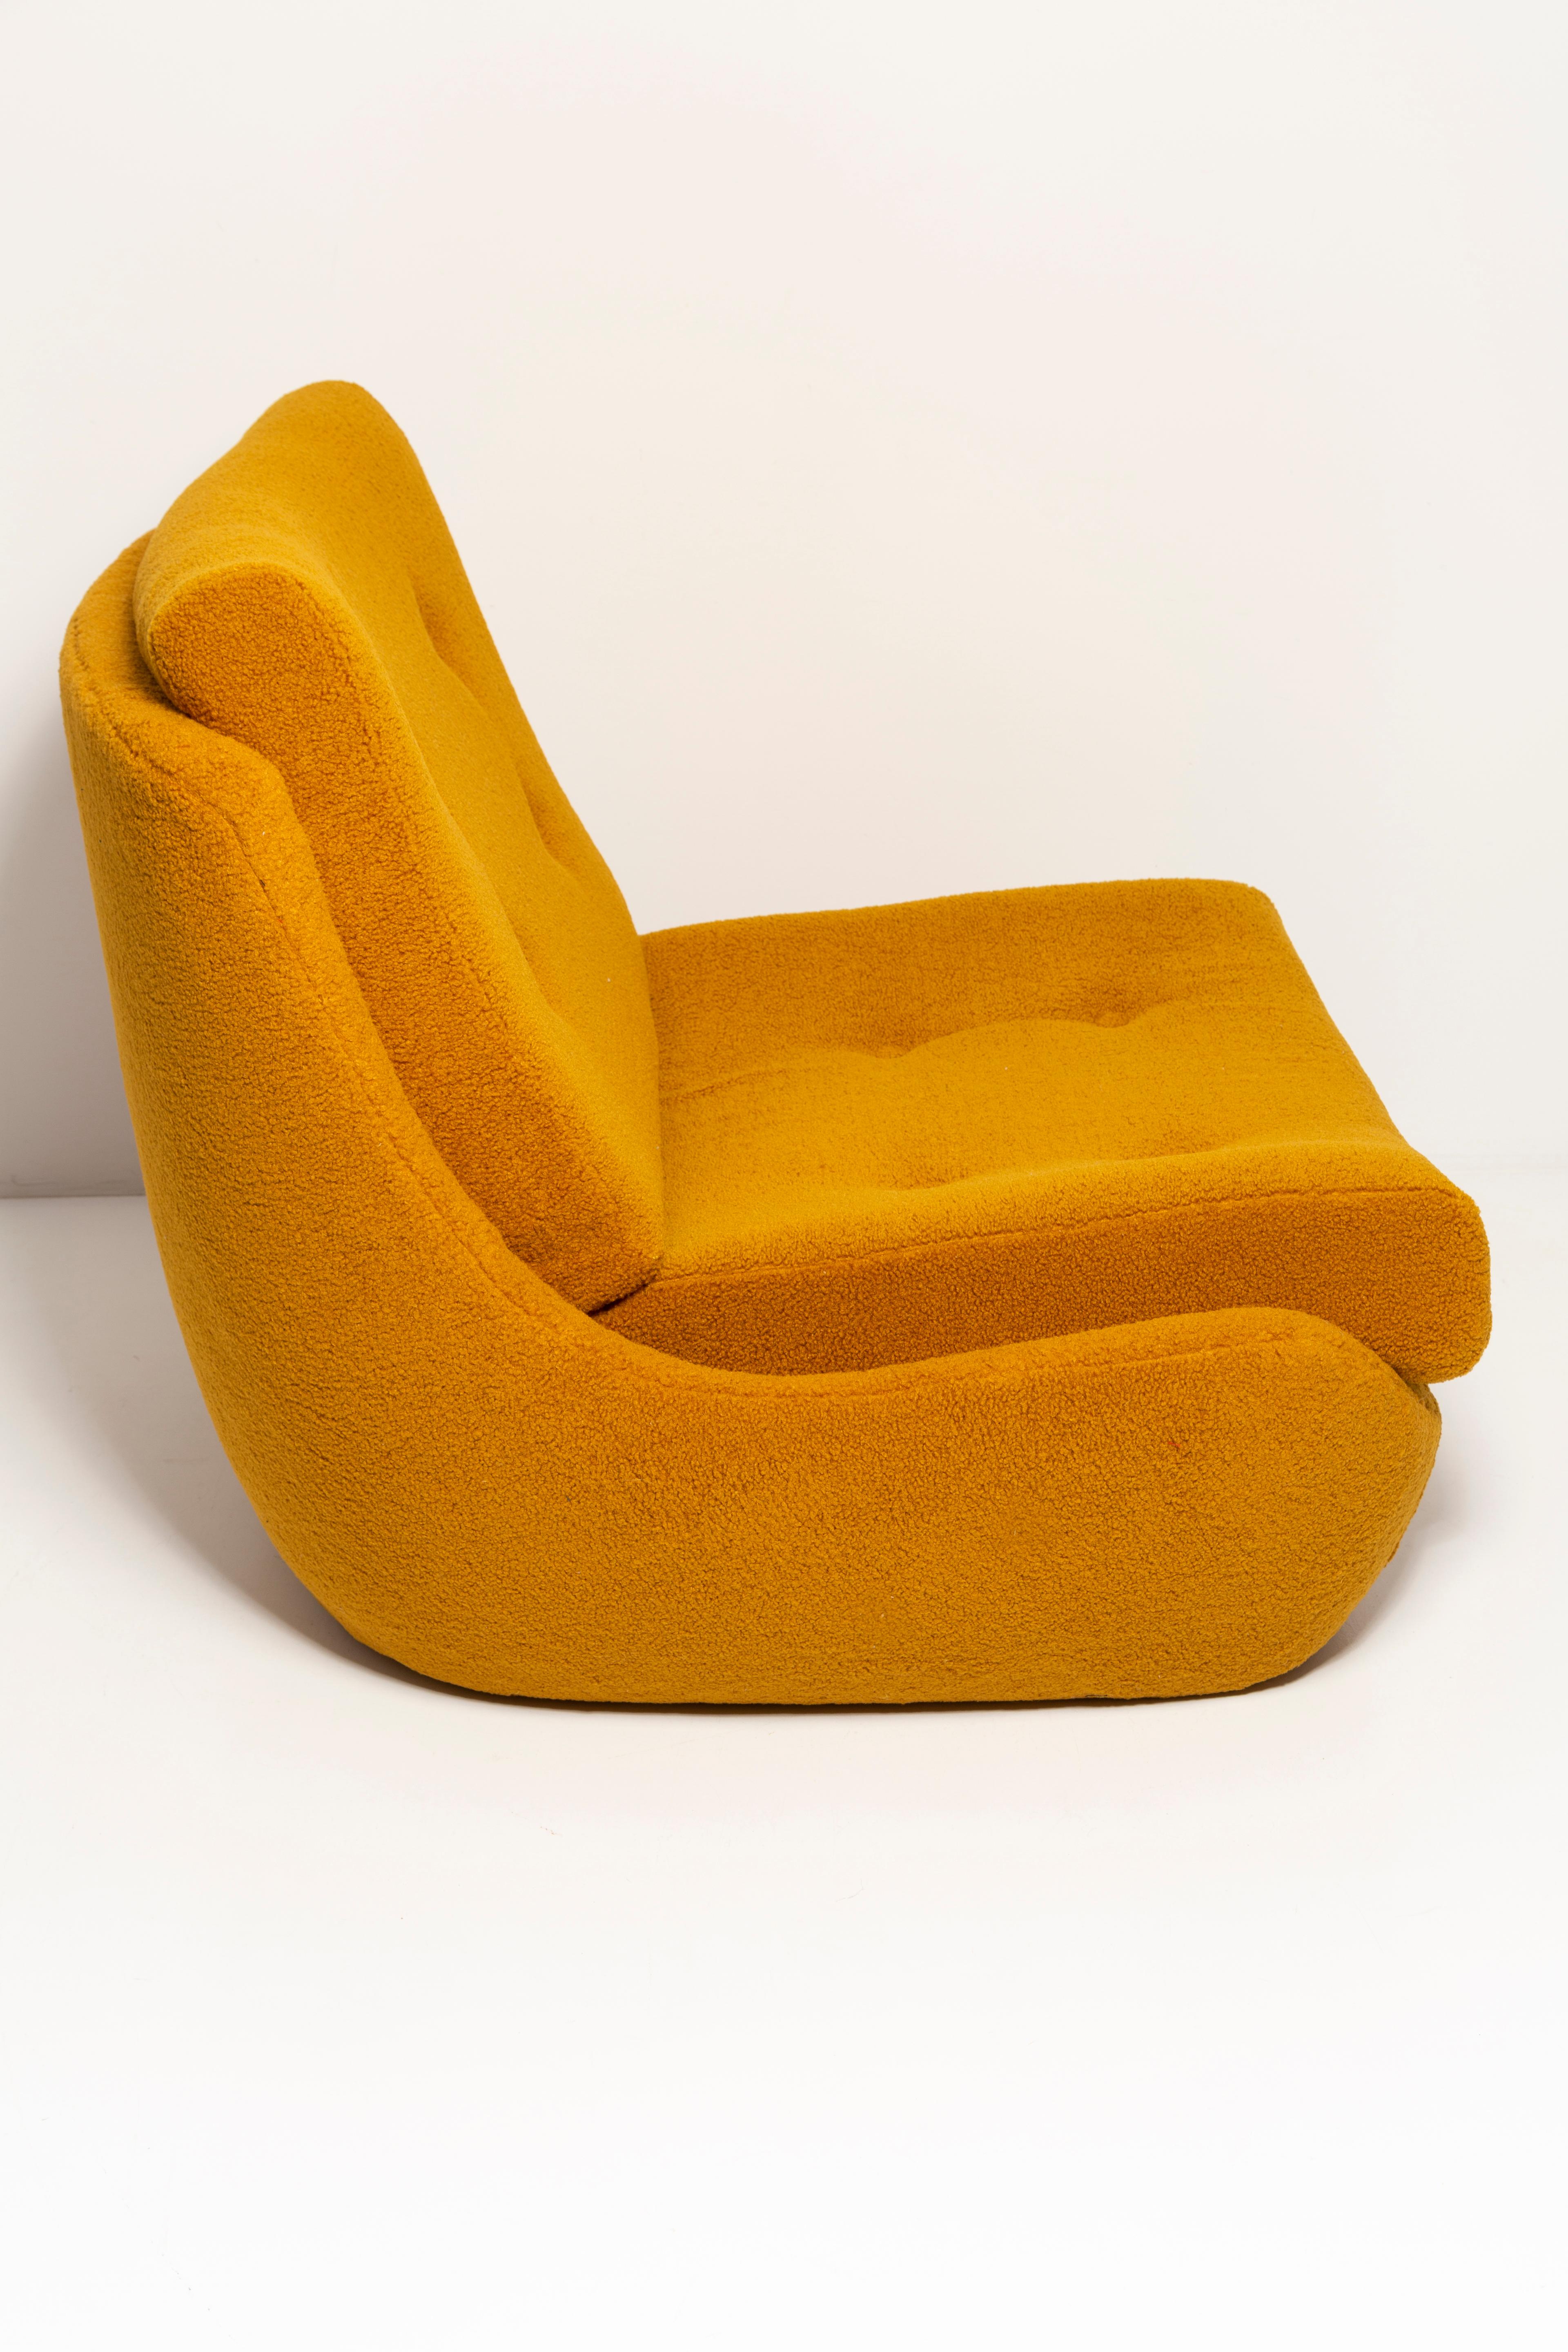 Hand-Crafted 20th Century Vintage Ochre Yellow Boucle Atlantis Big Armchair, 1960s For Sale